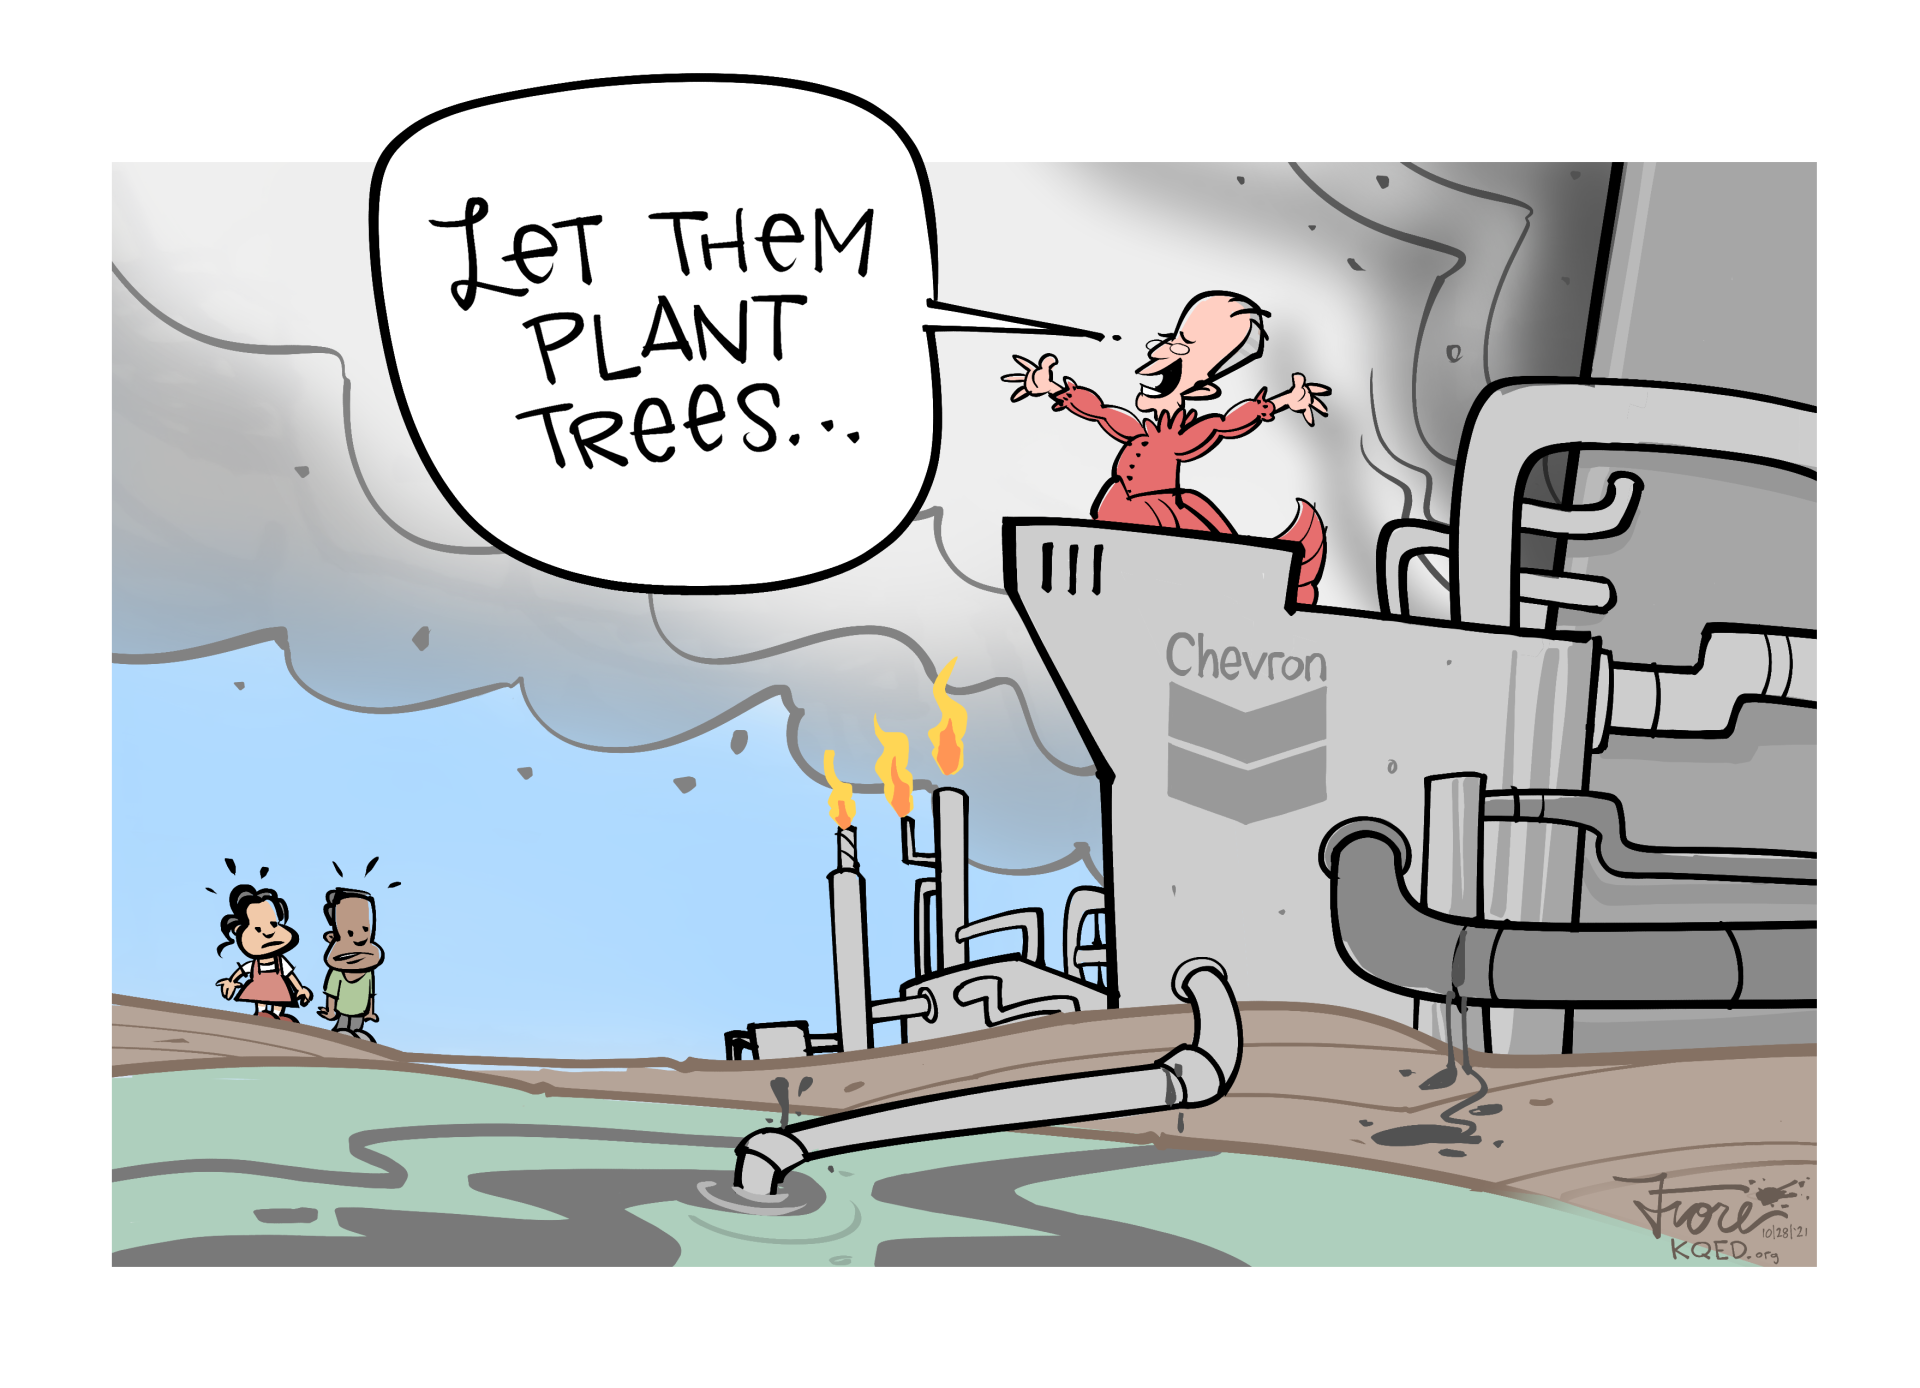 Cartoon: Chevron CEO Michael Wirth atop a castle-like refinery saying, "let them plant trees," while pollution spews into the air and water and two small children look on from afar.